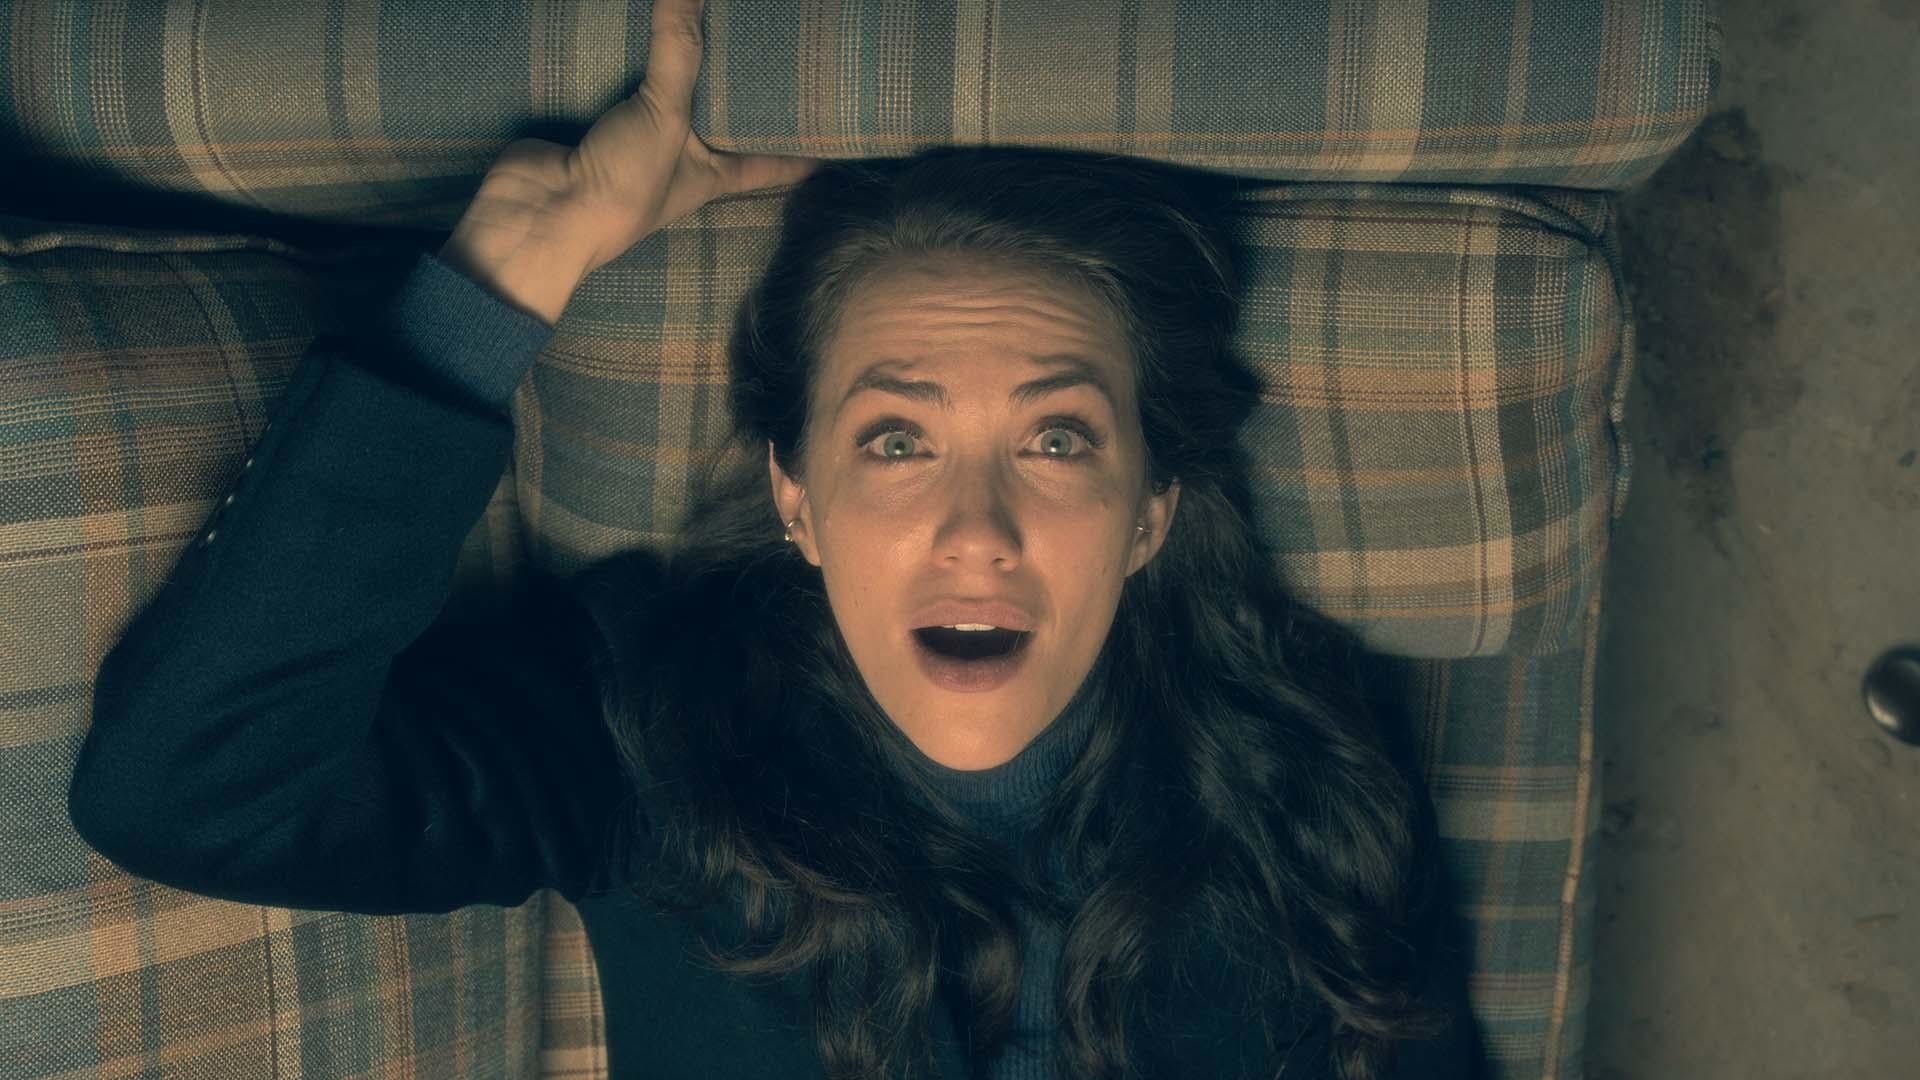 The Haunting of Hill House: “Touch”